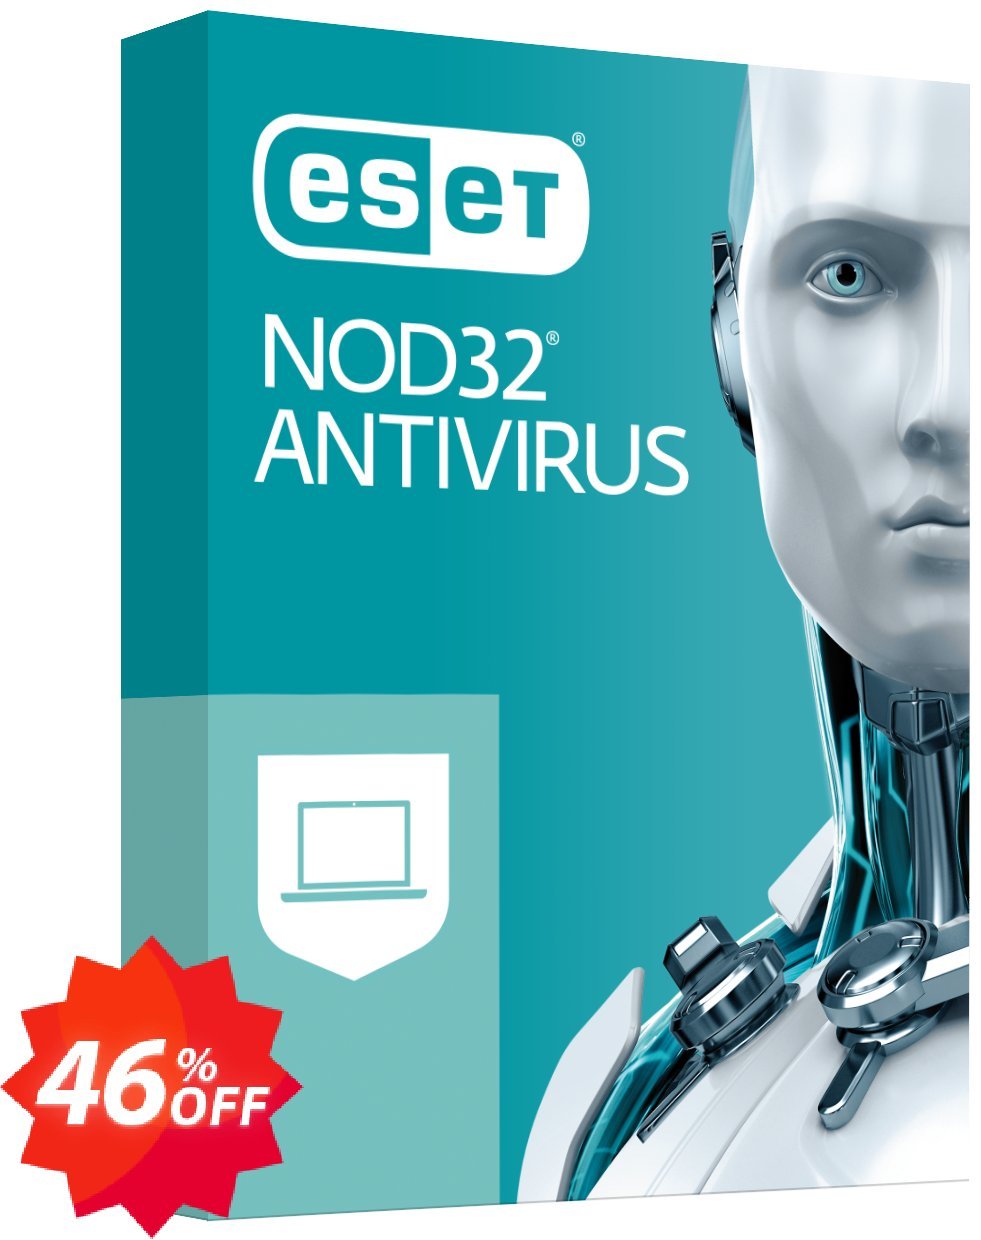 ESET NOD32 Antivirus - Renew Yearly 5 Devices Coupon code 46% discount 